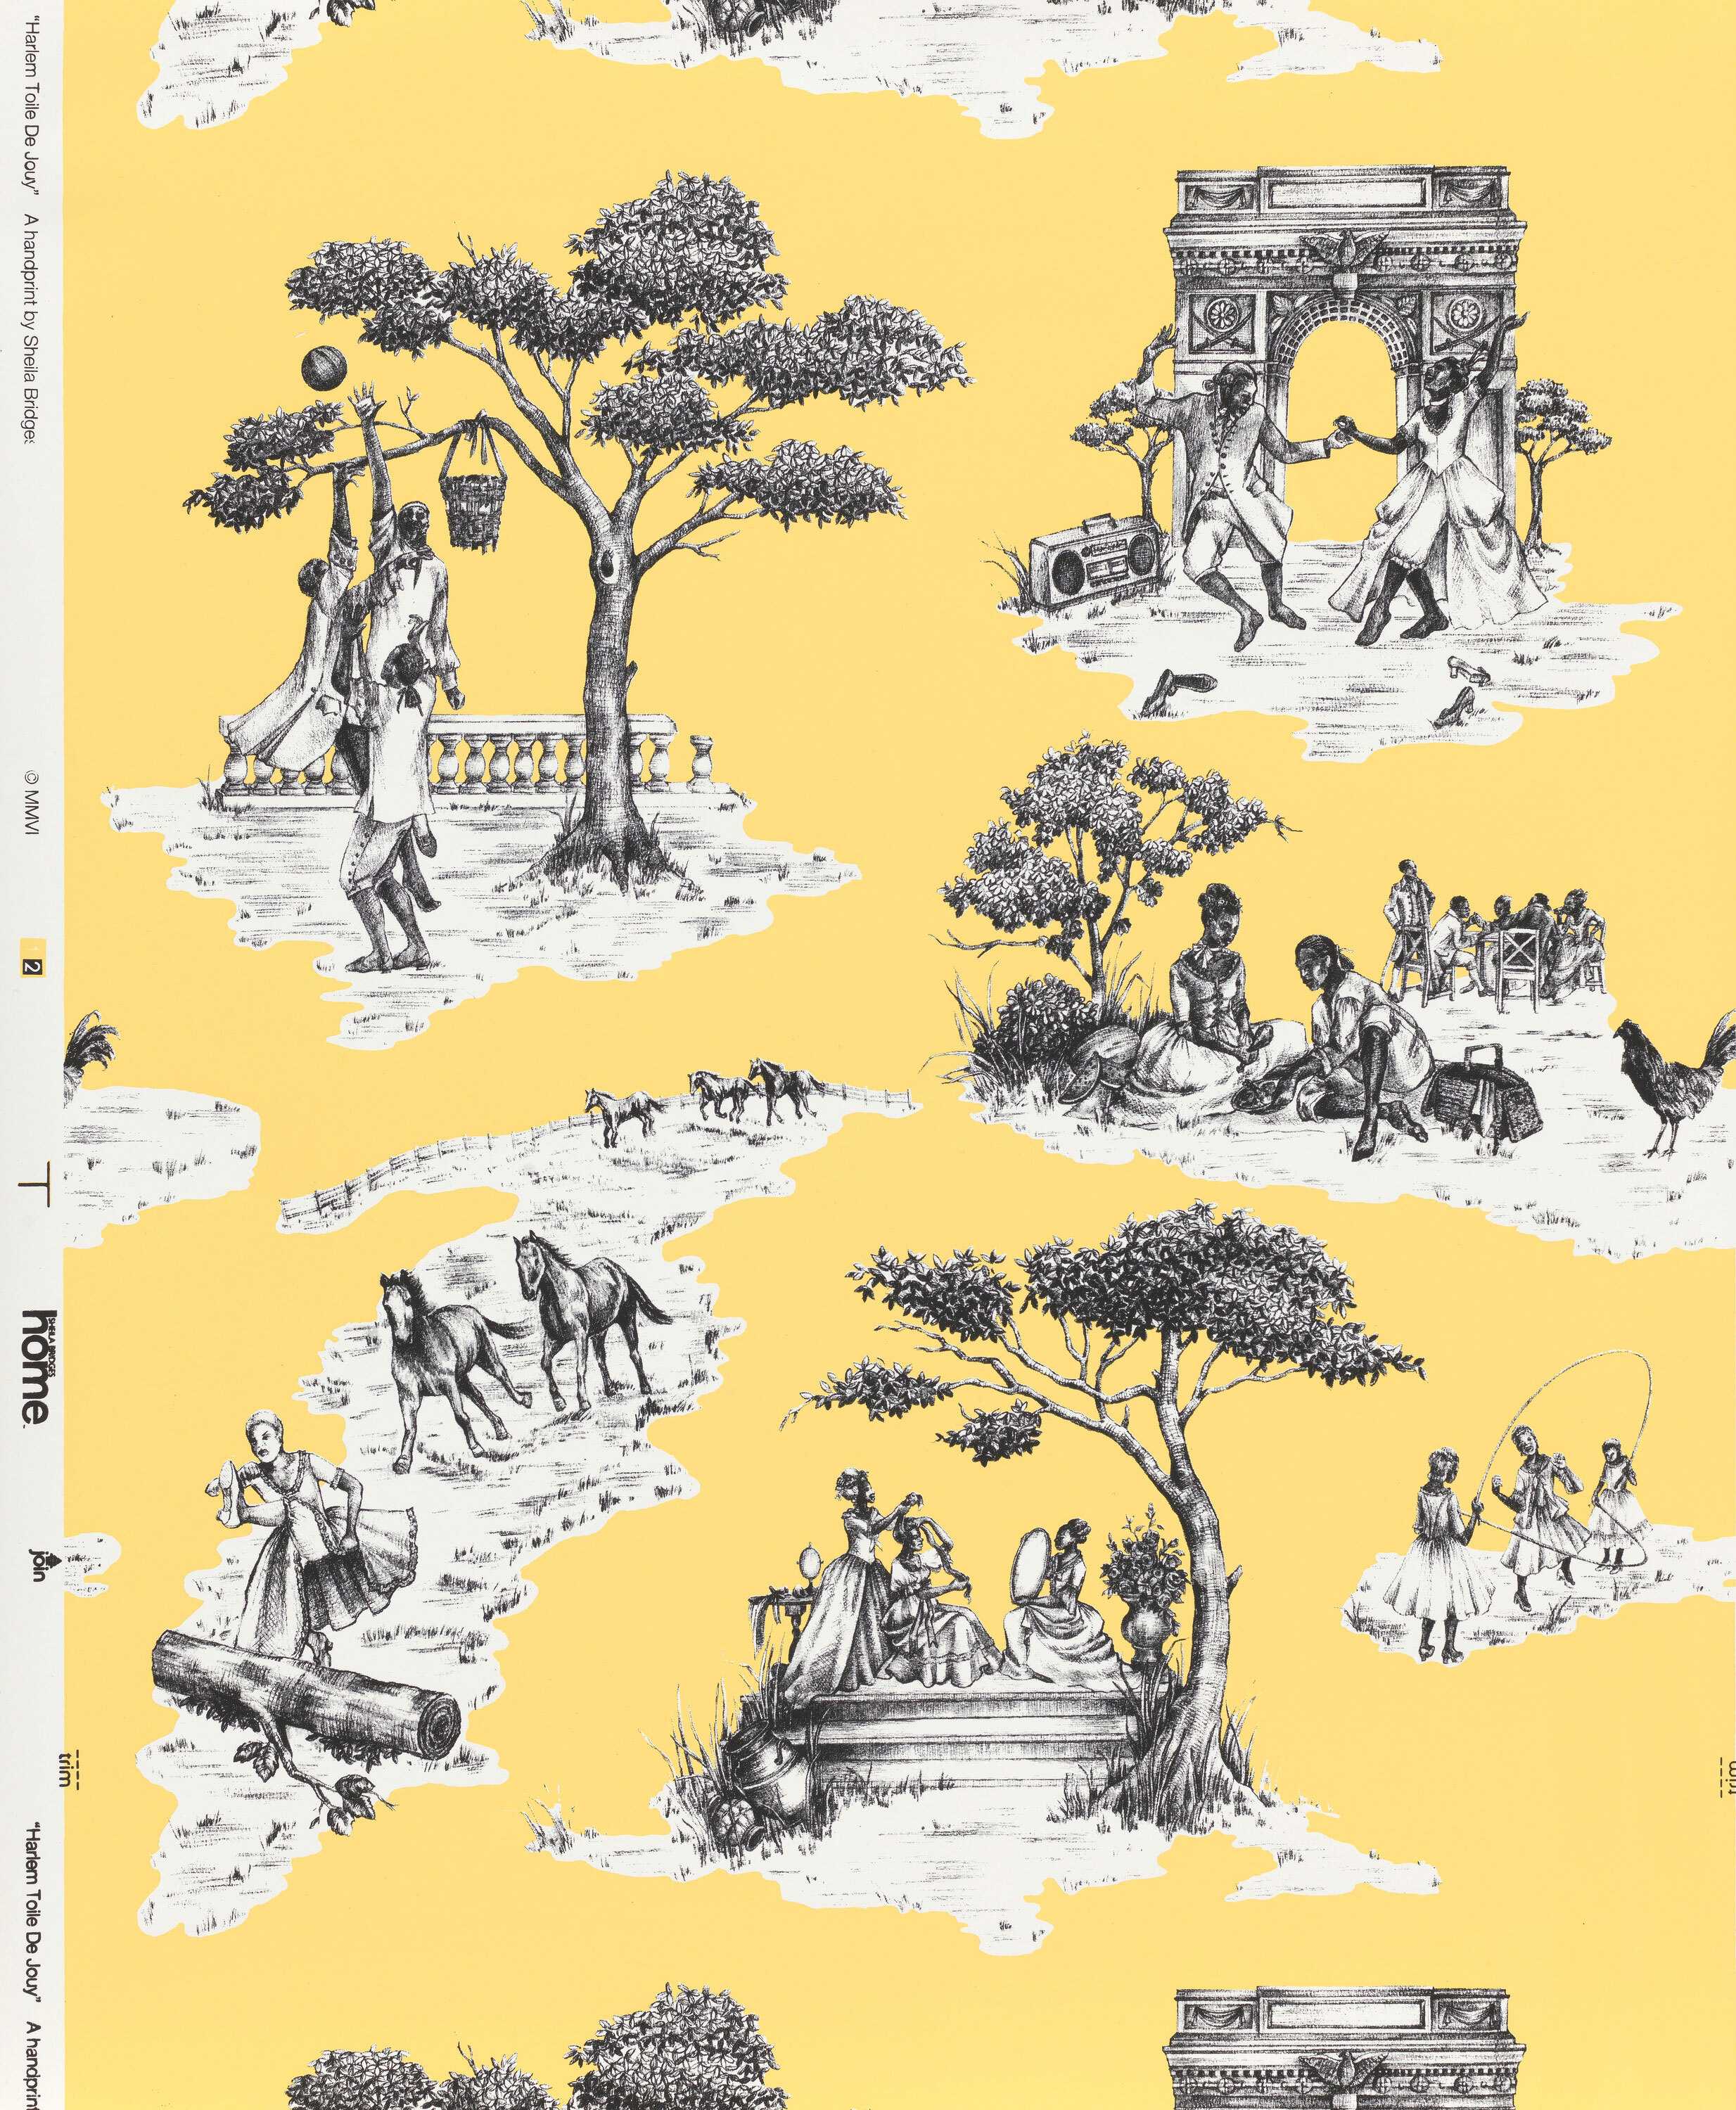 Yellow wall paper with black and white vignettes in the toile style..  They feature scenes of people engaged in leisure activities in 18th century clothing.